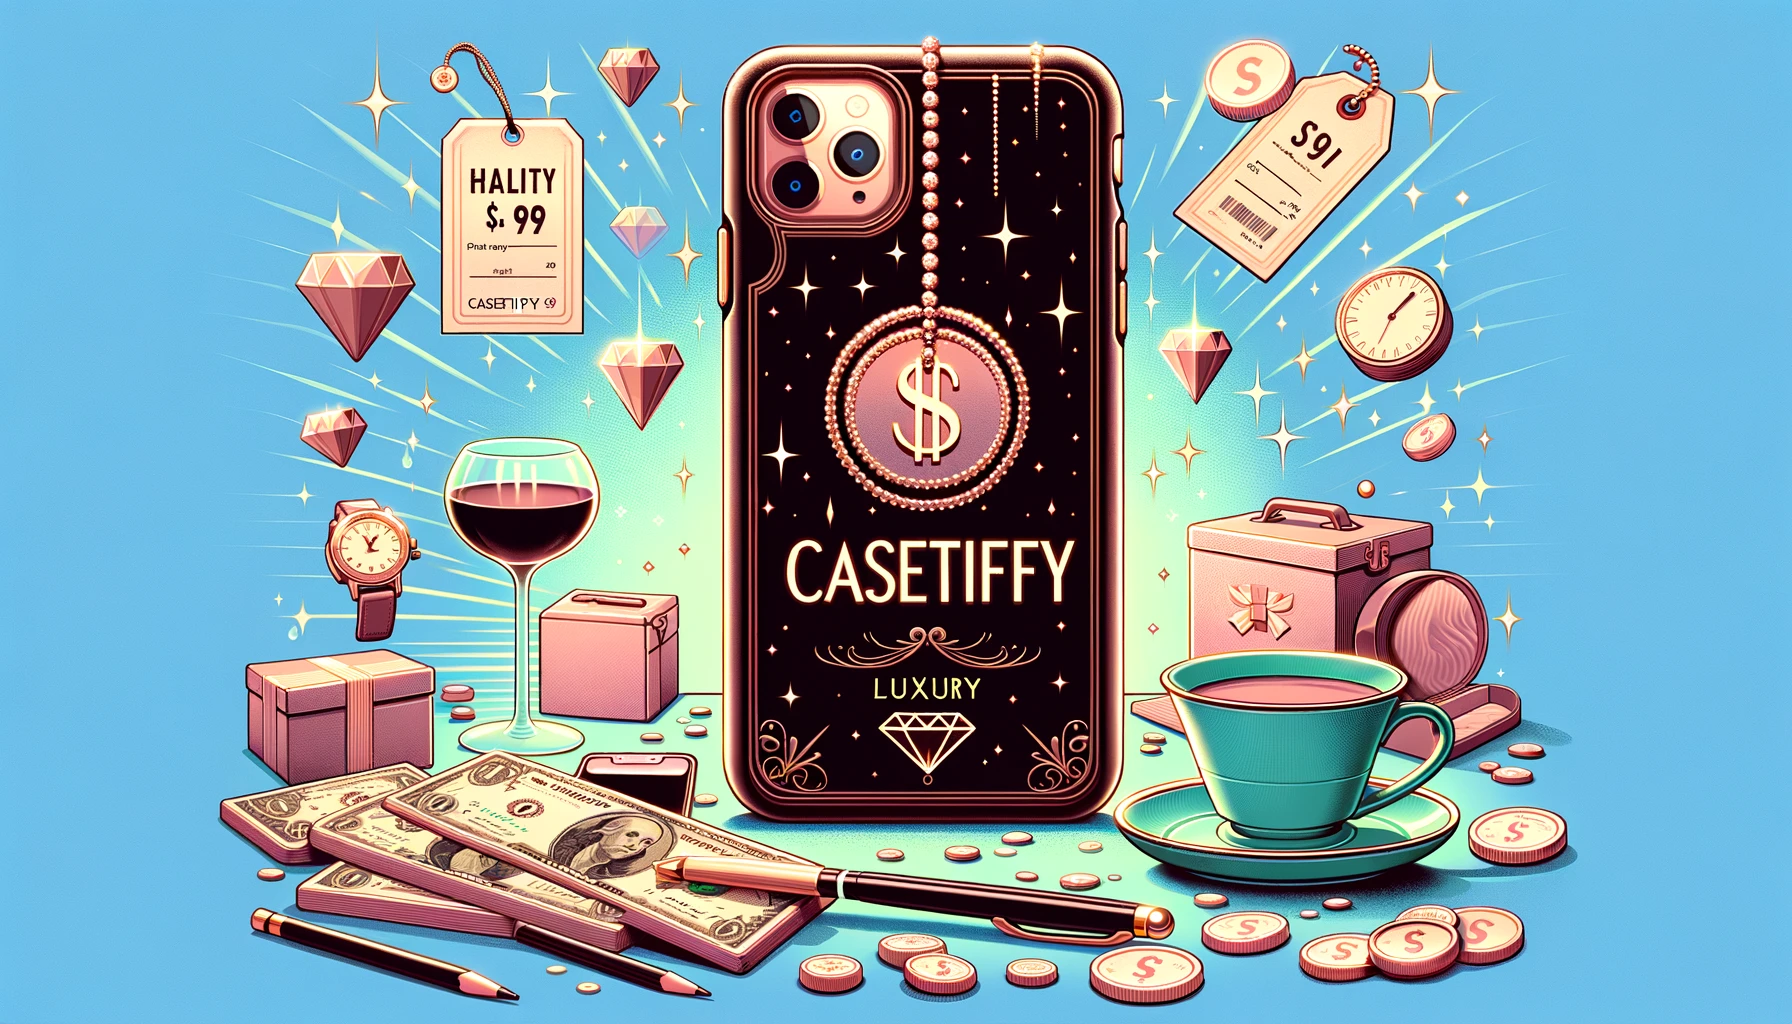 An image highlighting the high price of CASETiFY phone cases. Include luxury elements and a price tag with the word 'CASETiFY' prominently displayed.